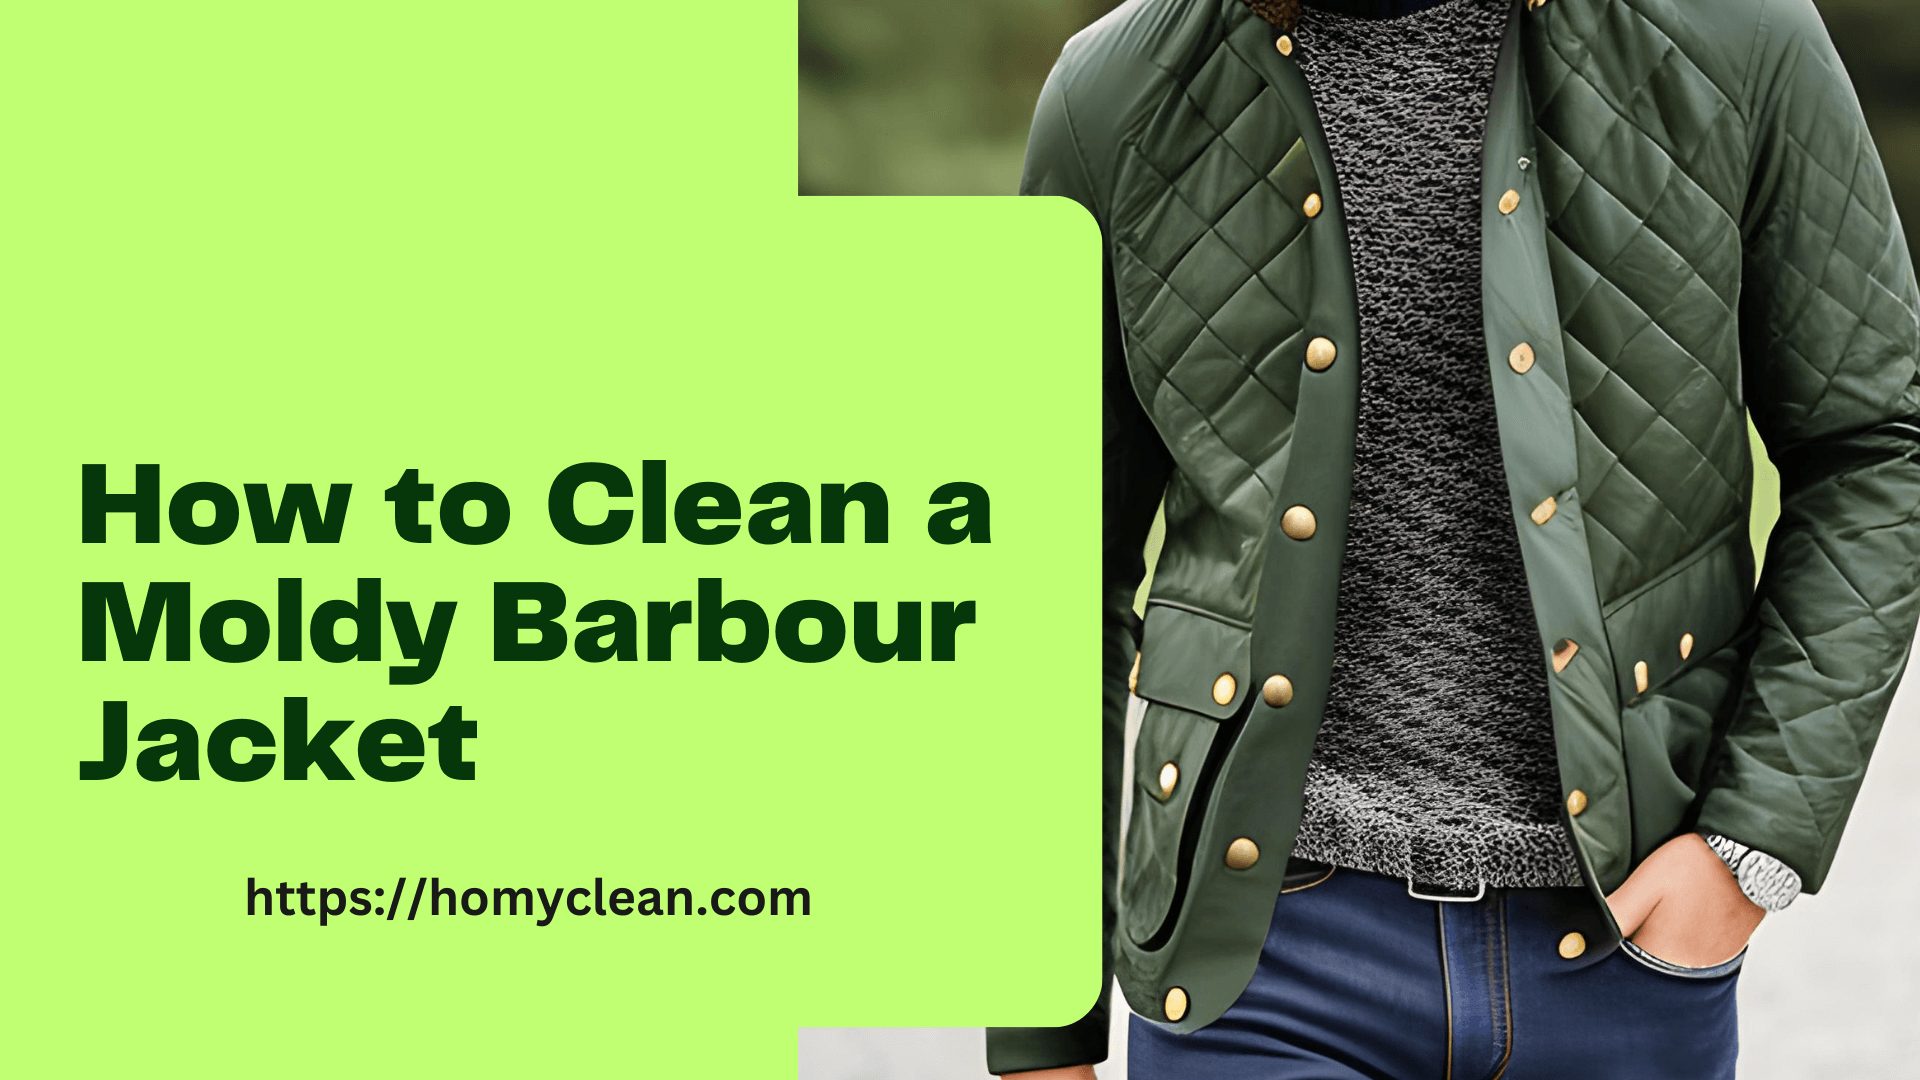 How to Clean Moldy Barbour Jacket